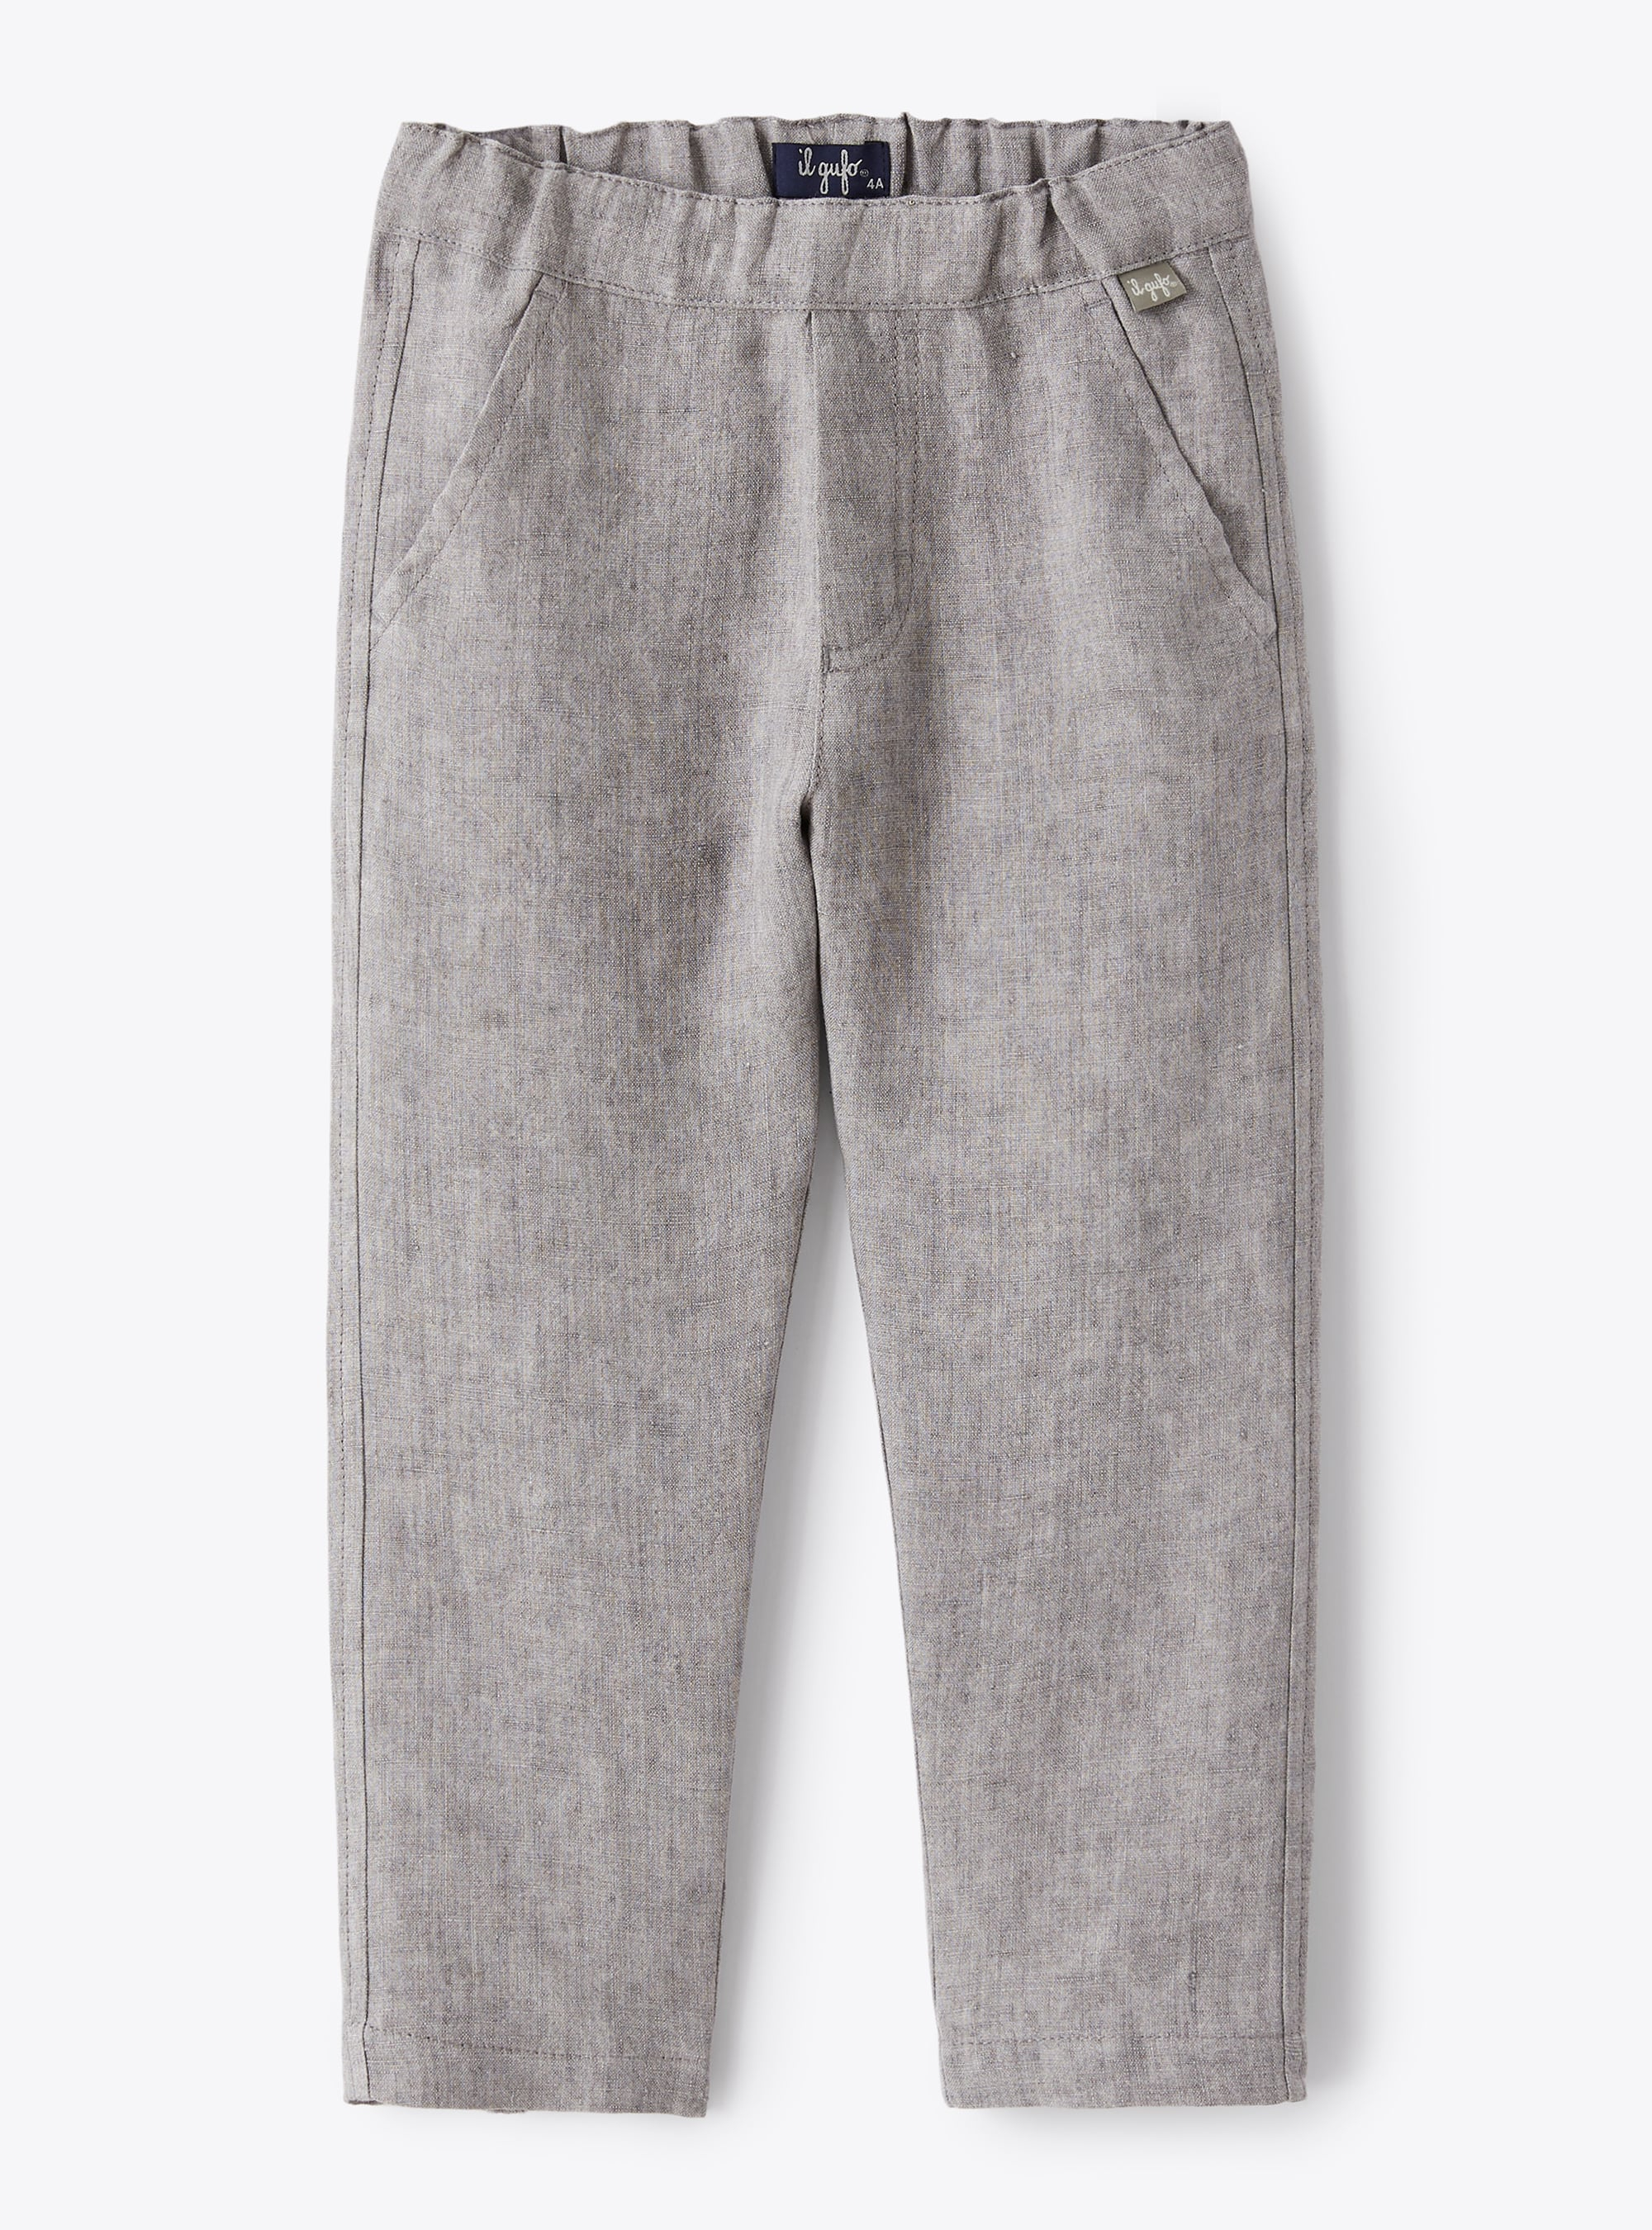 Carrot-fit trousers in grey linen - Trousers - Il Gufo